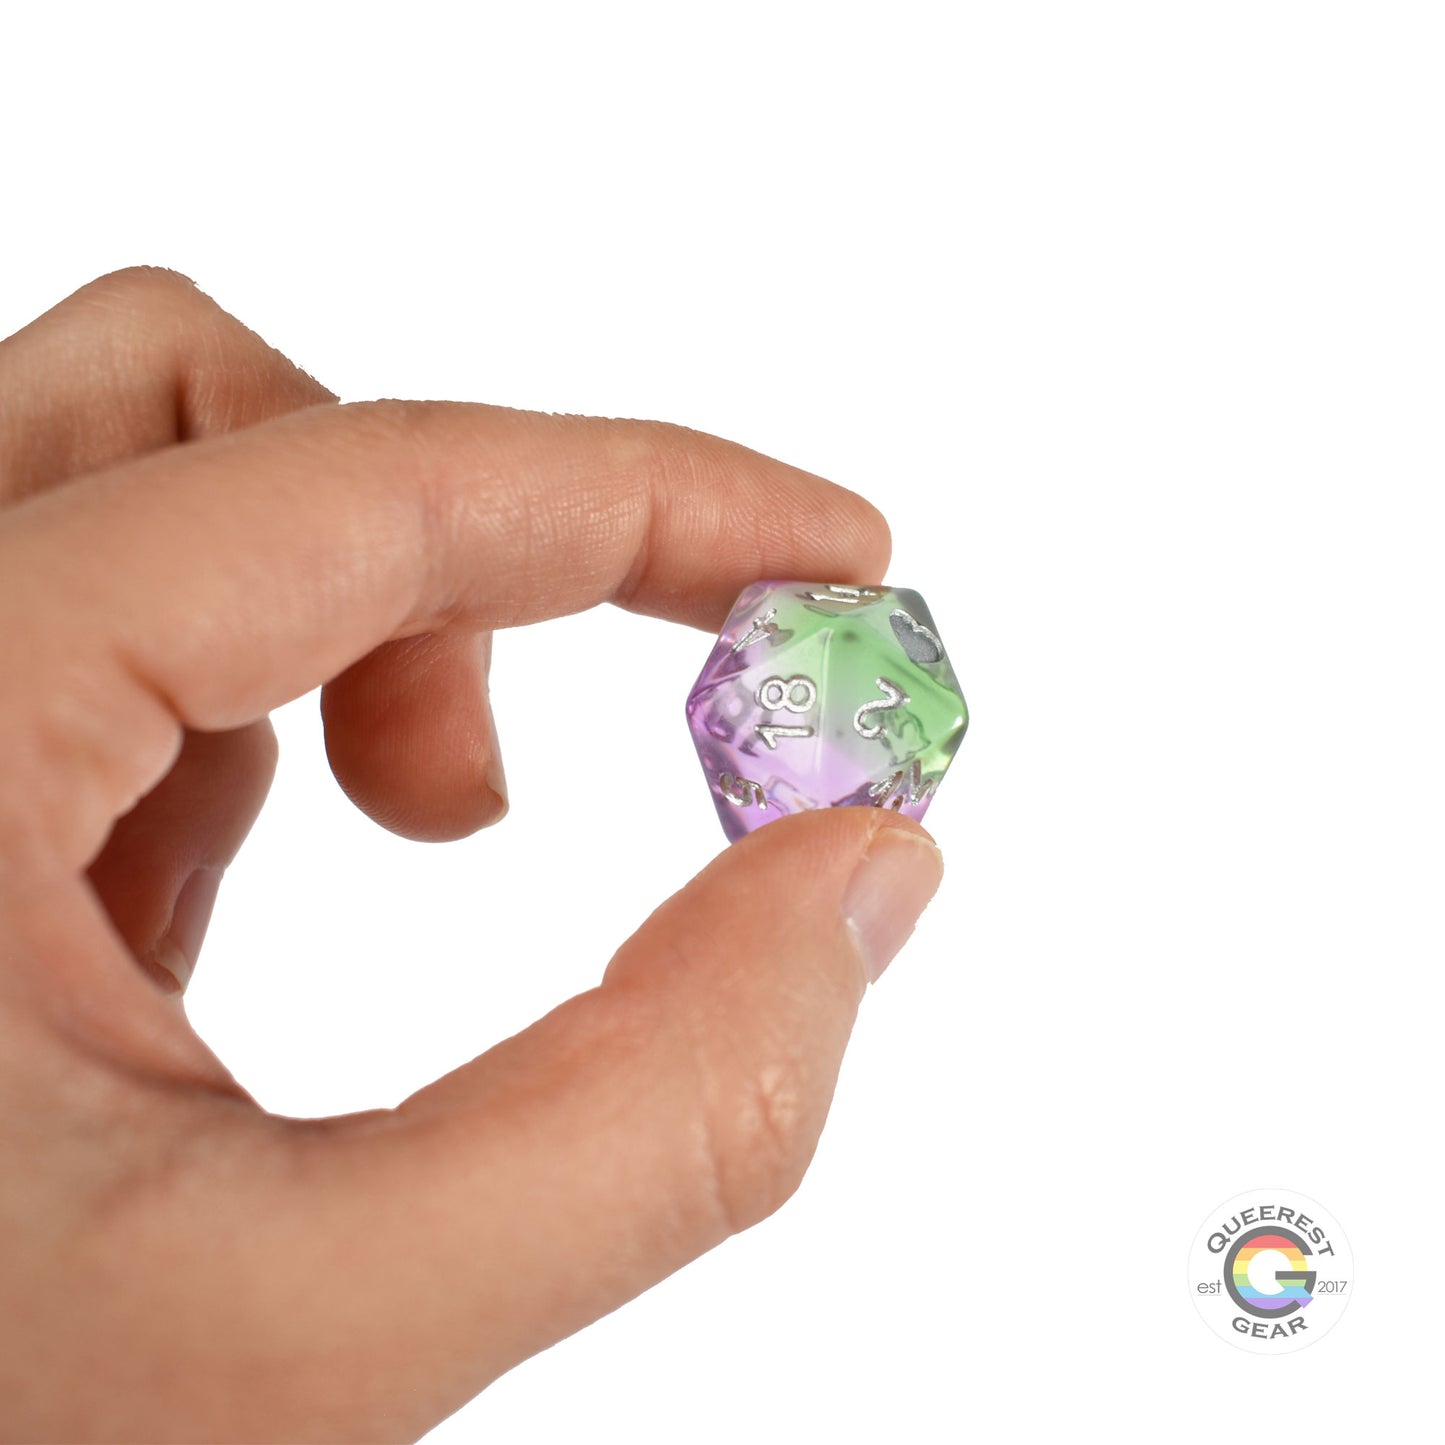 A hand holding up the genderqueer d20 to show off the color and transparency